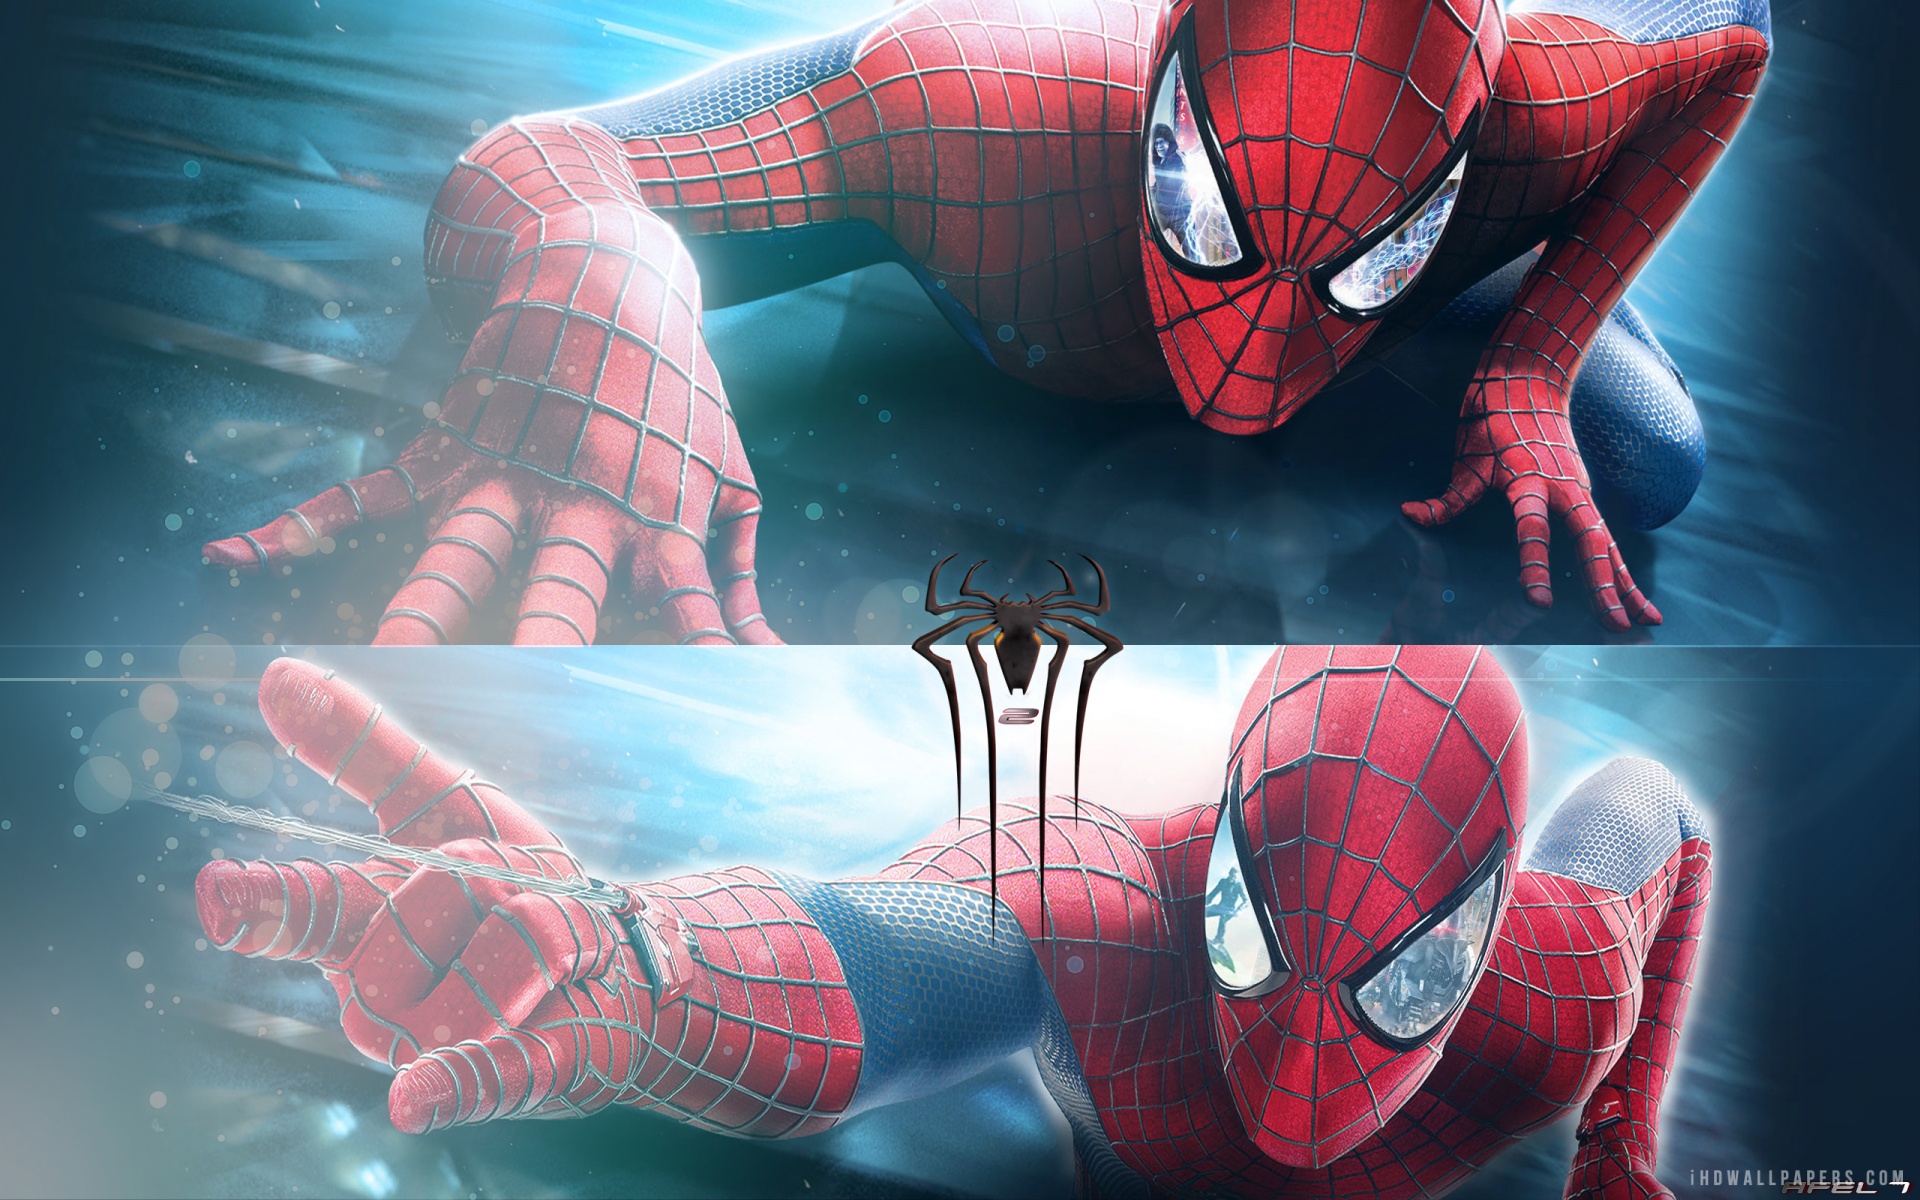 The Amazing Spider Man 2 Movie HD Wallpaper - iHD Wallpapers